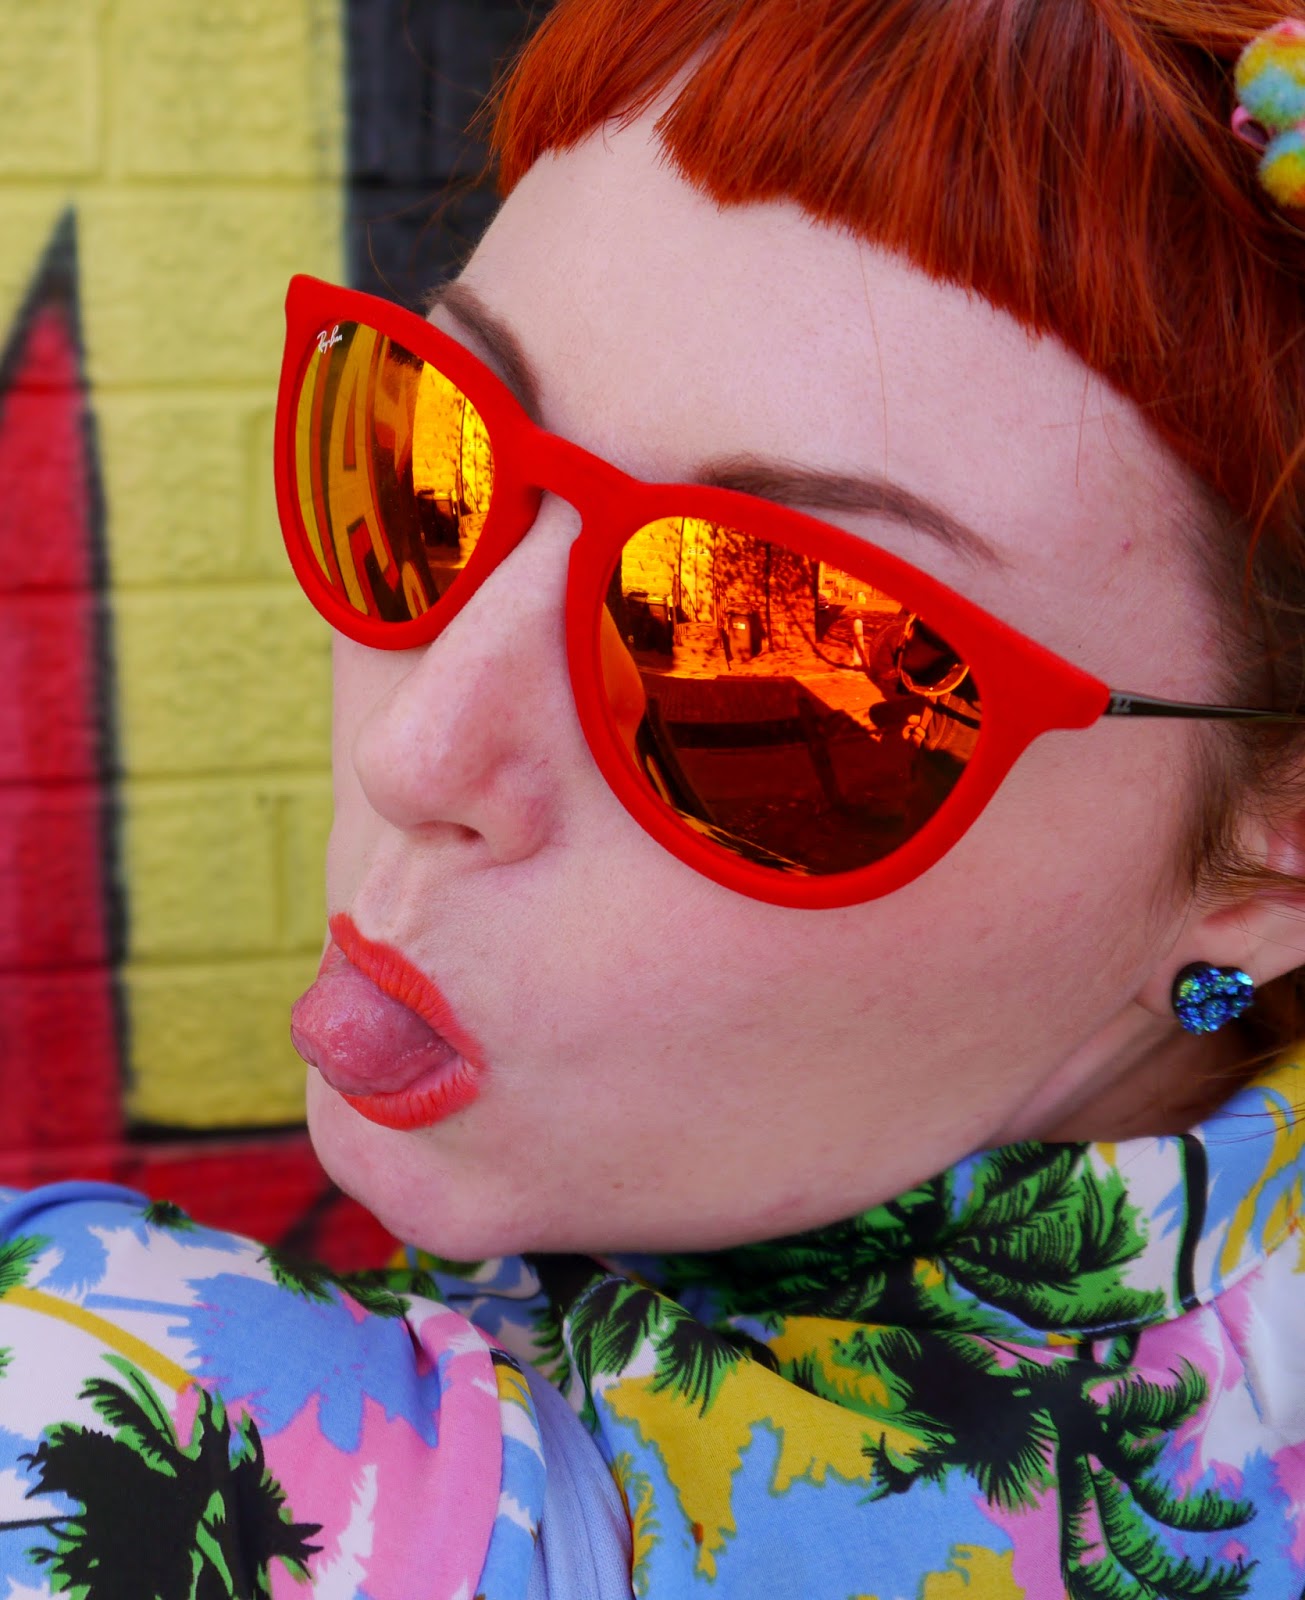 Scottish Blogger, Red Head, Ginger, Styled by Helen, Dundee, Amazing Spectacles, Graffiti, Tropical shirt, Luna on the Moon, Hair Slides, pom pom, Sun Glasses Shop, velvet sunglasses, rayban, Ray-Ban, Cheap Frills heart earrings, bright outfit, summer outfit, summer style, Abandon Ship, Kewpie tote bag, Rock Cakes brooch, Bonnie Bling name ring